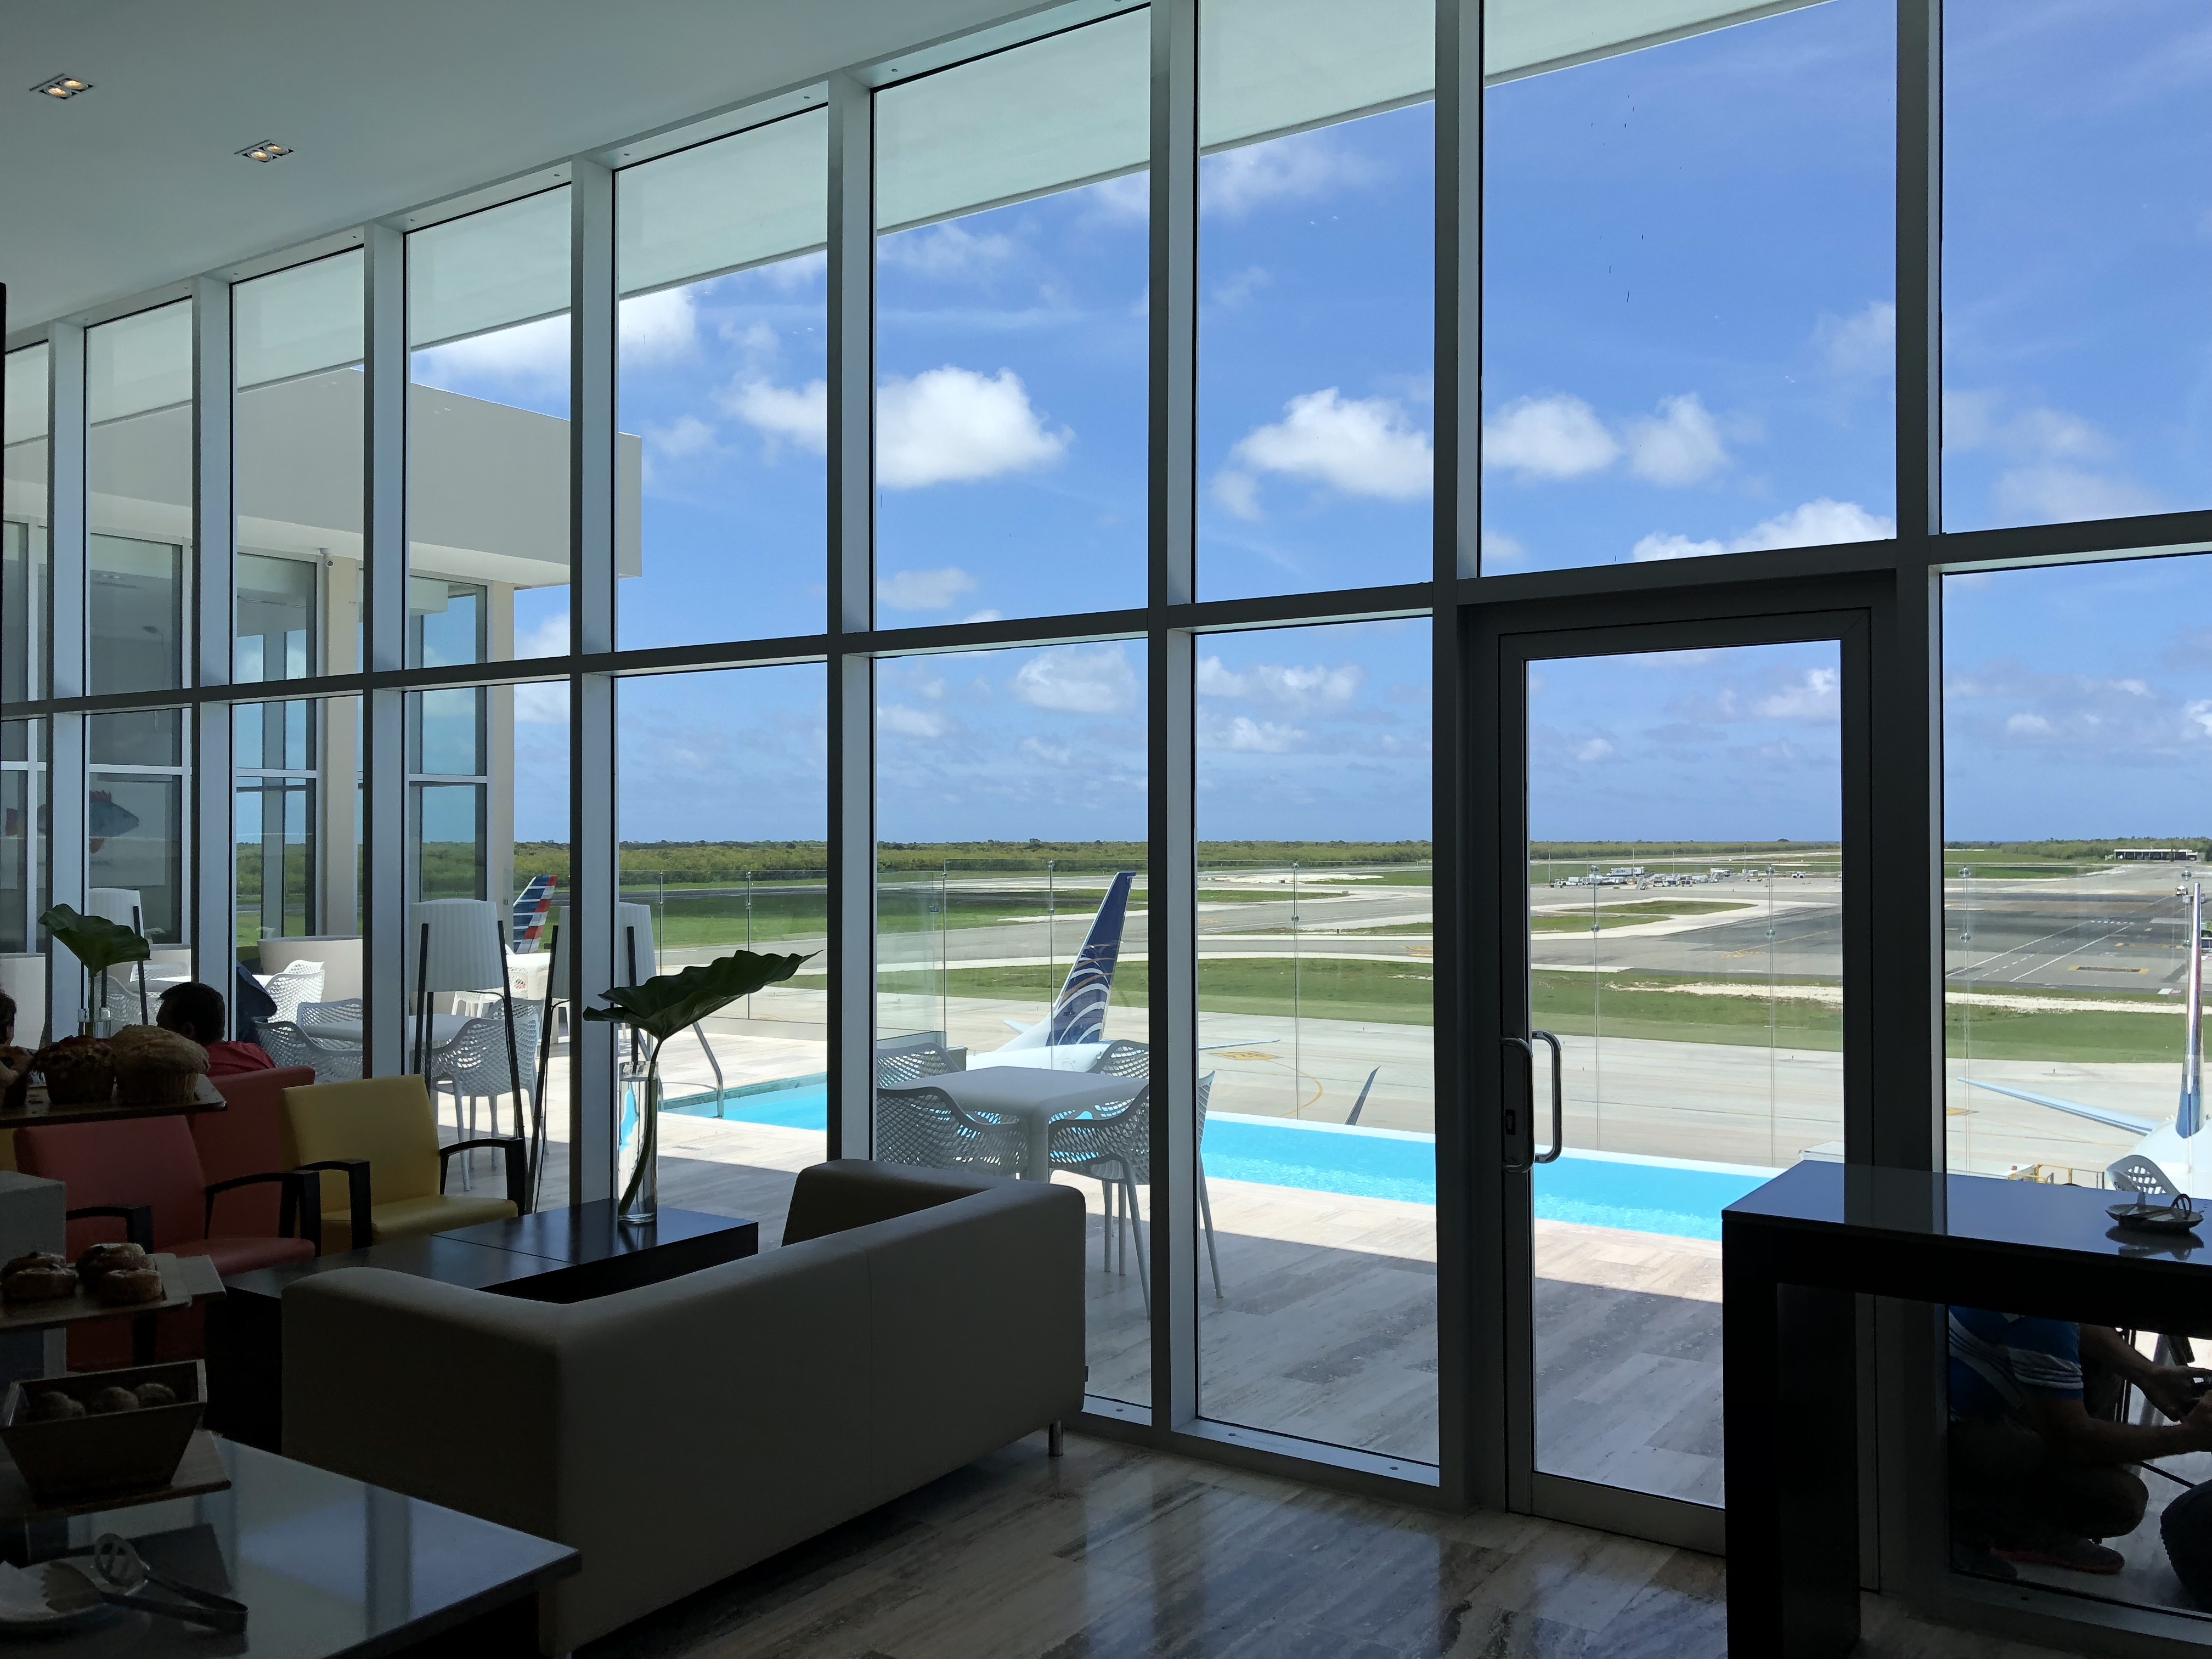 Airside Pool from inside the VIP Lounge Punta Cana